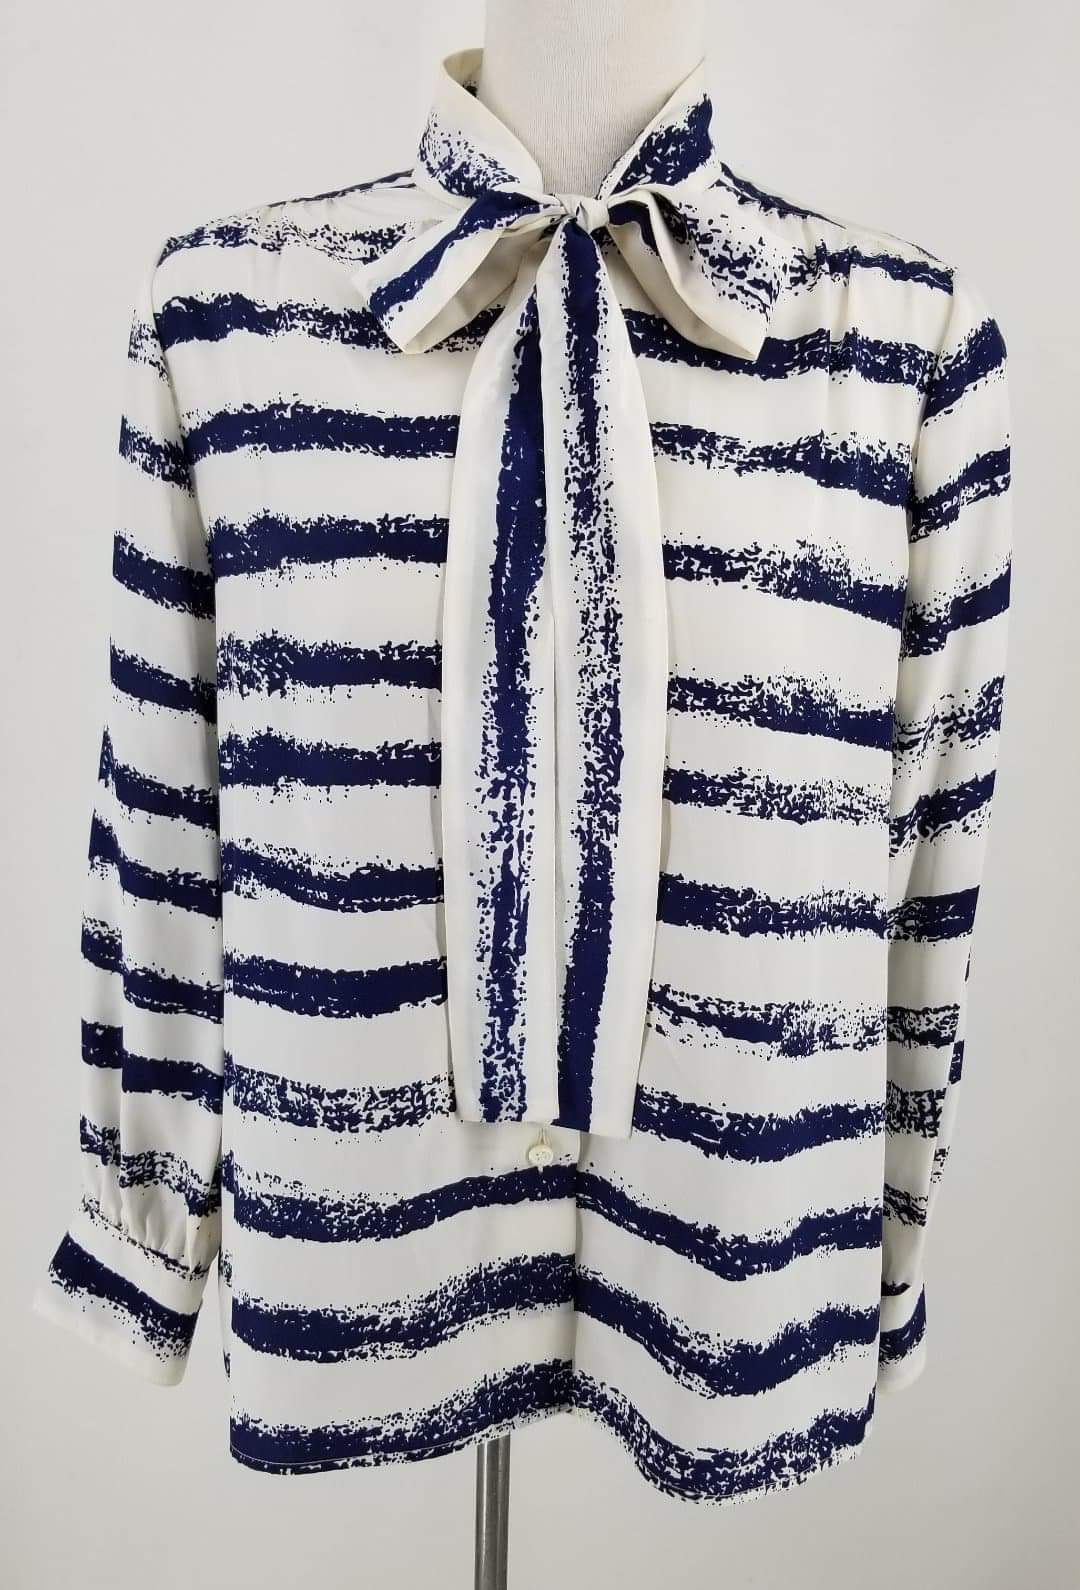 Authentic Chanel Cream Navy Pussy Bow Blouse Sz M/L